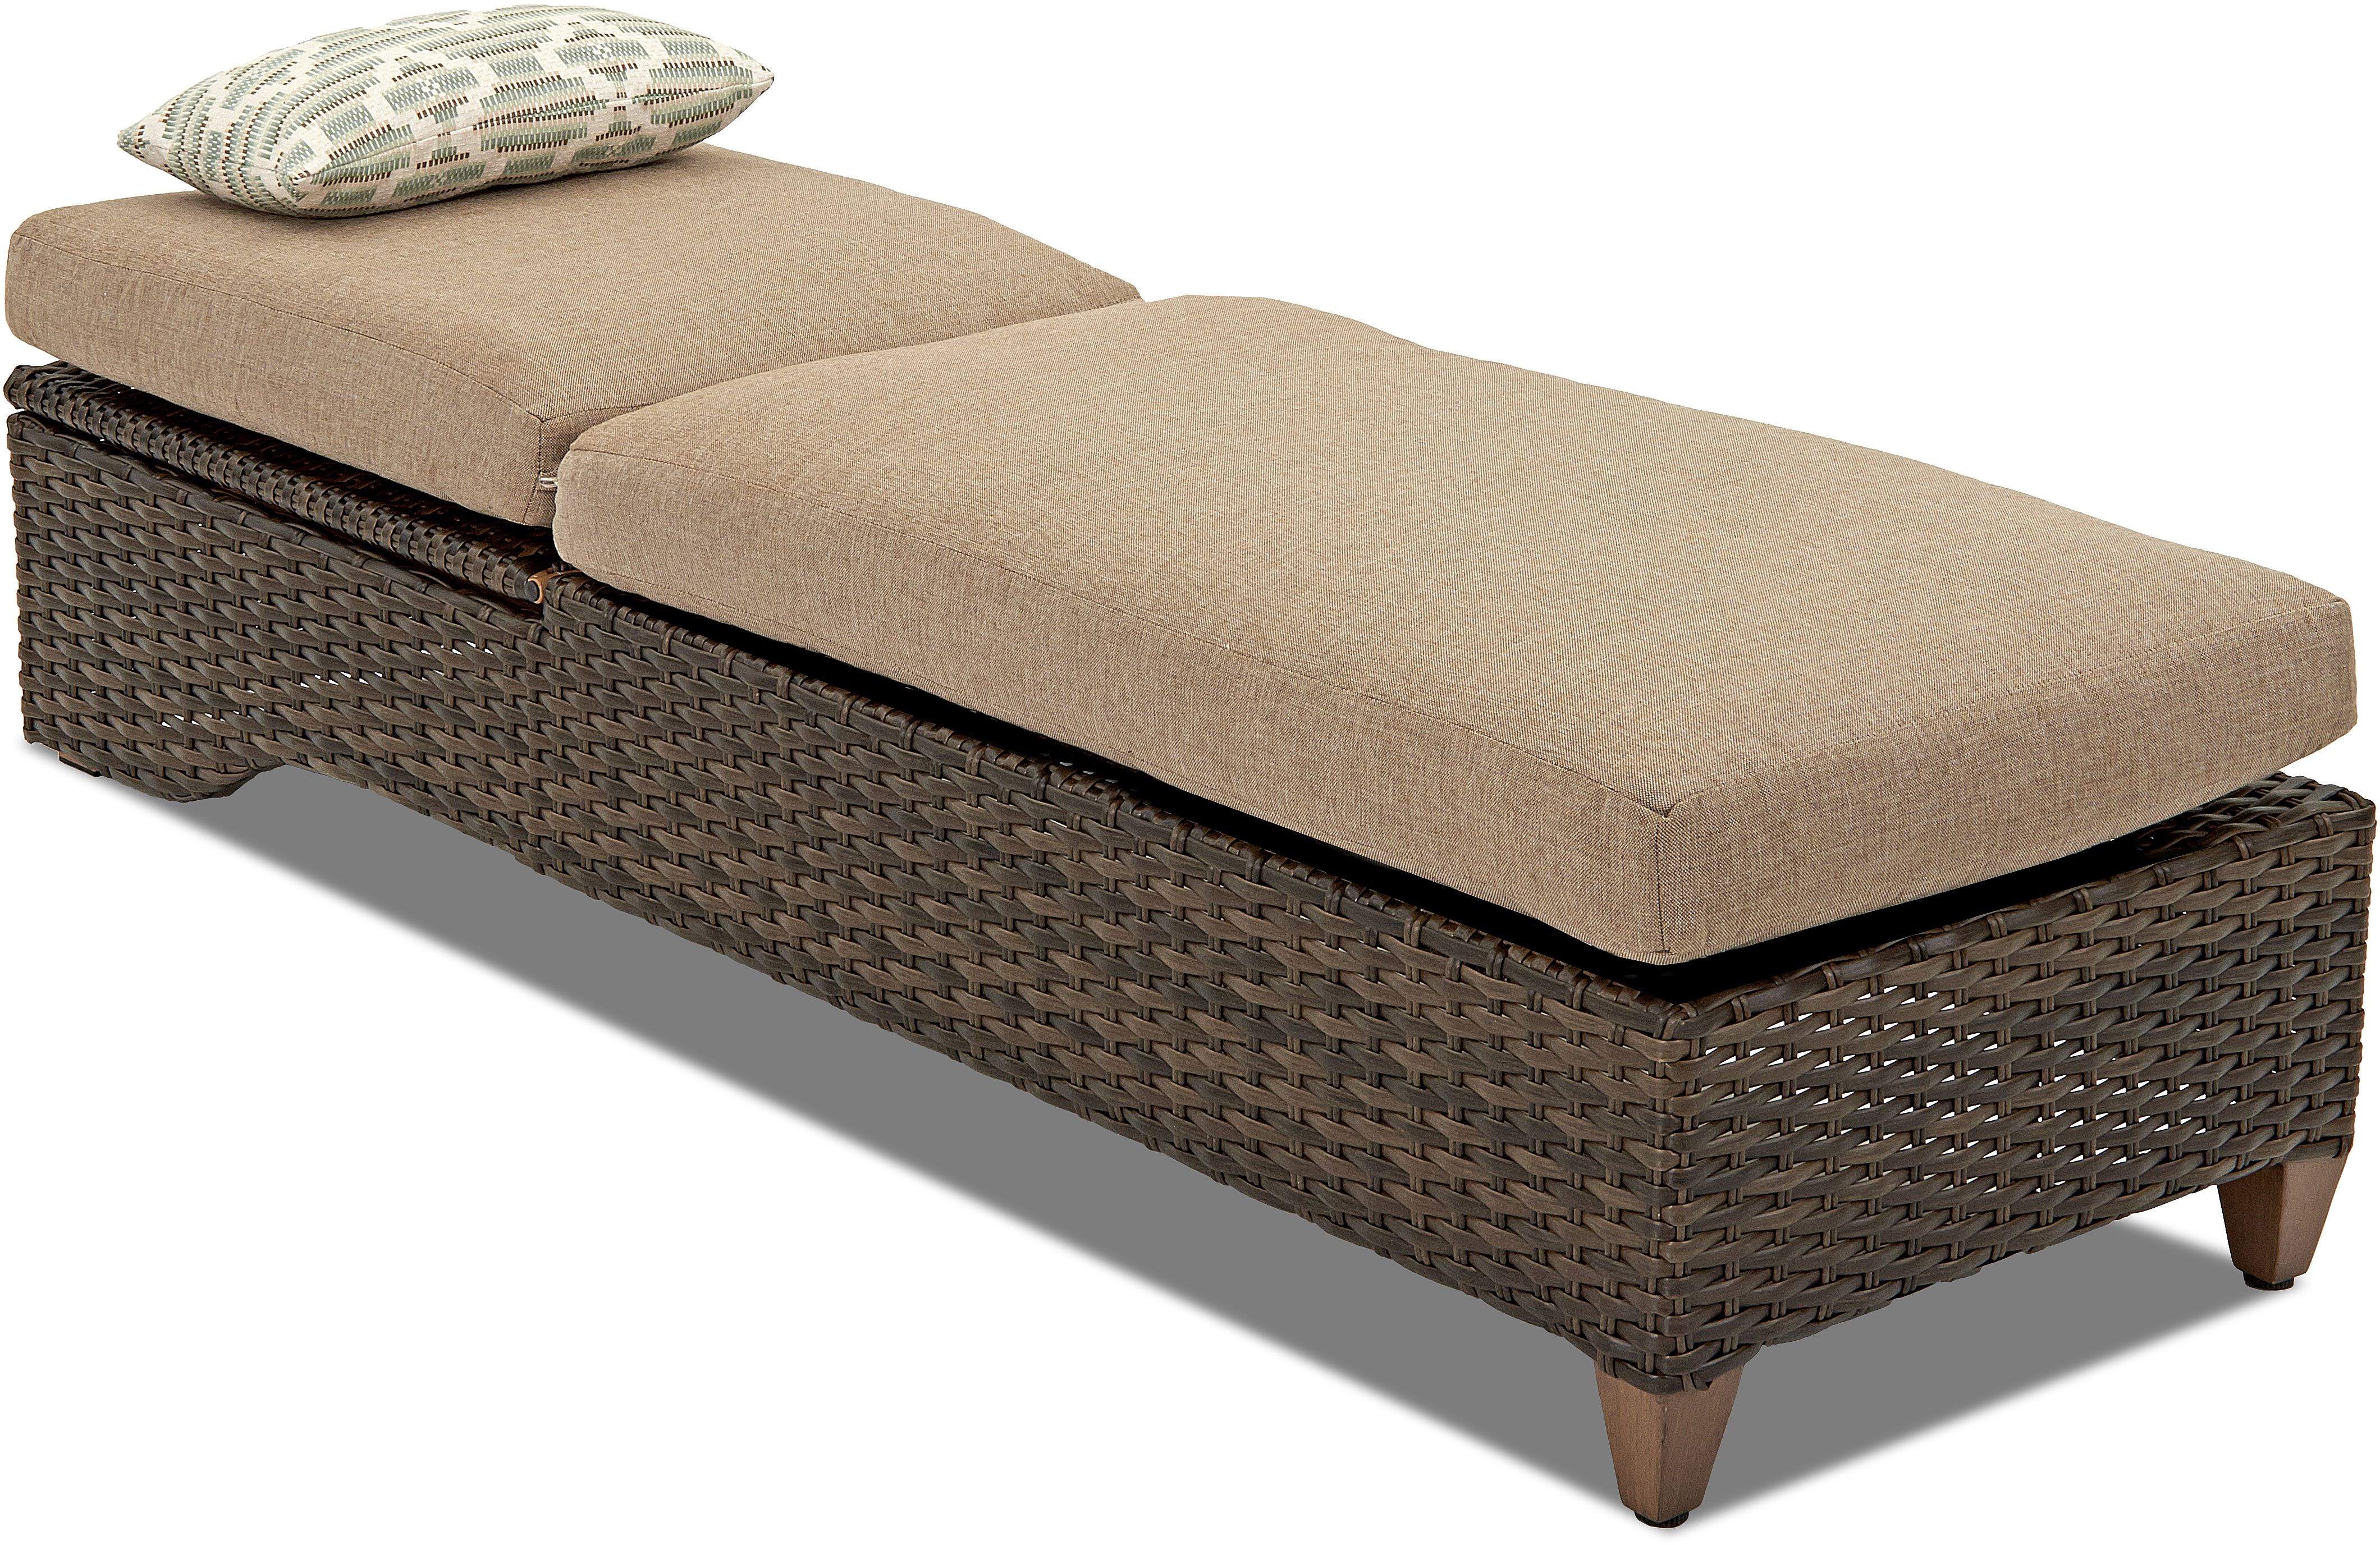 Klaussner® Outdoor Sycamore Chaise